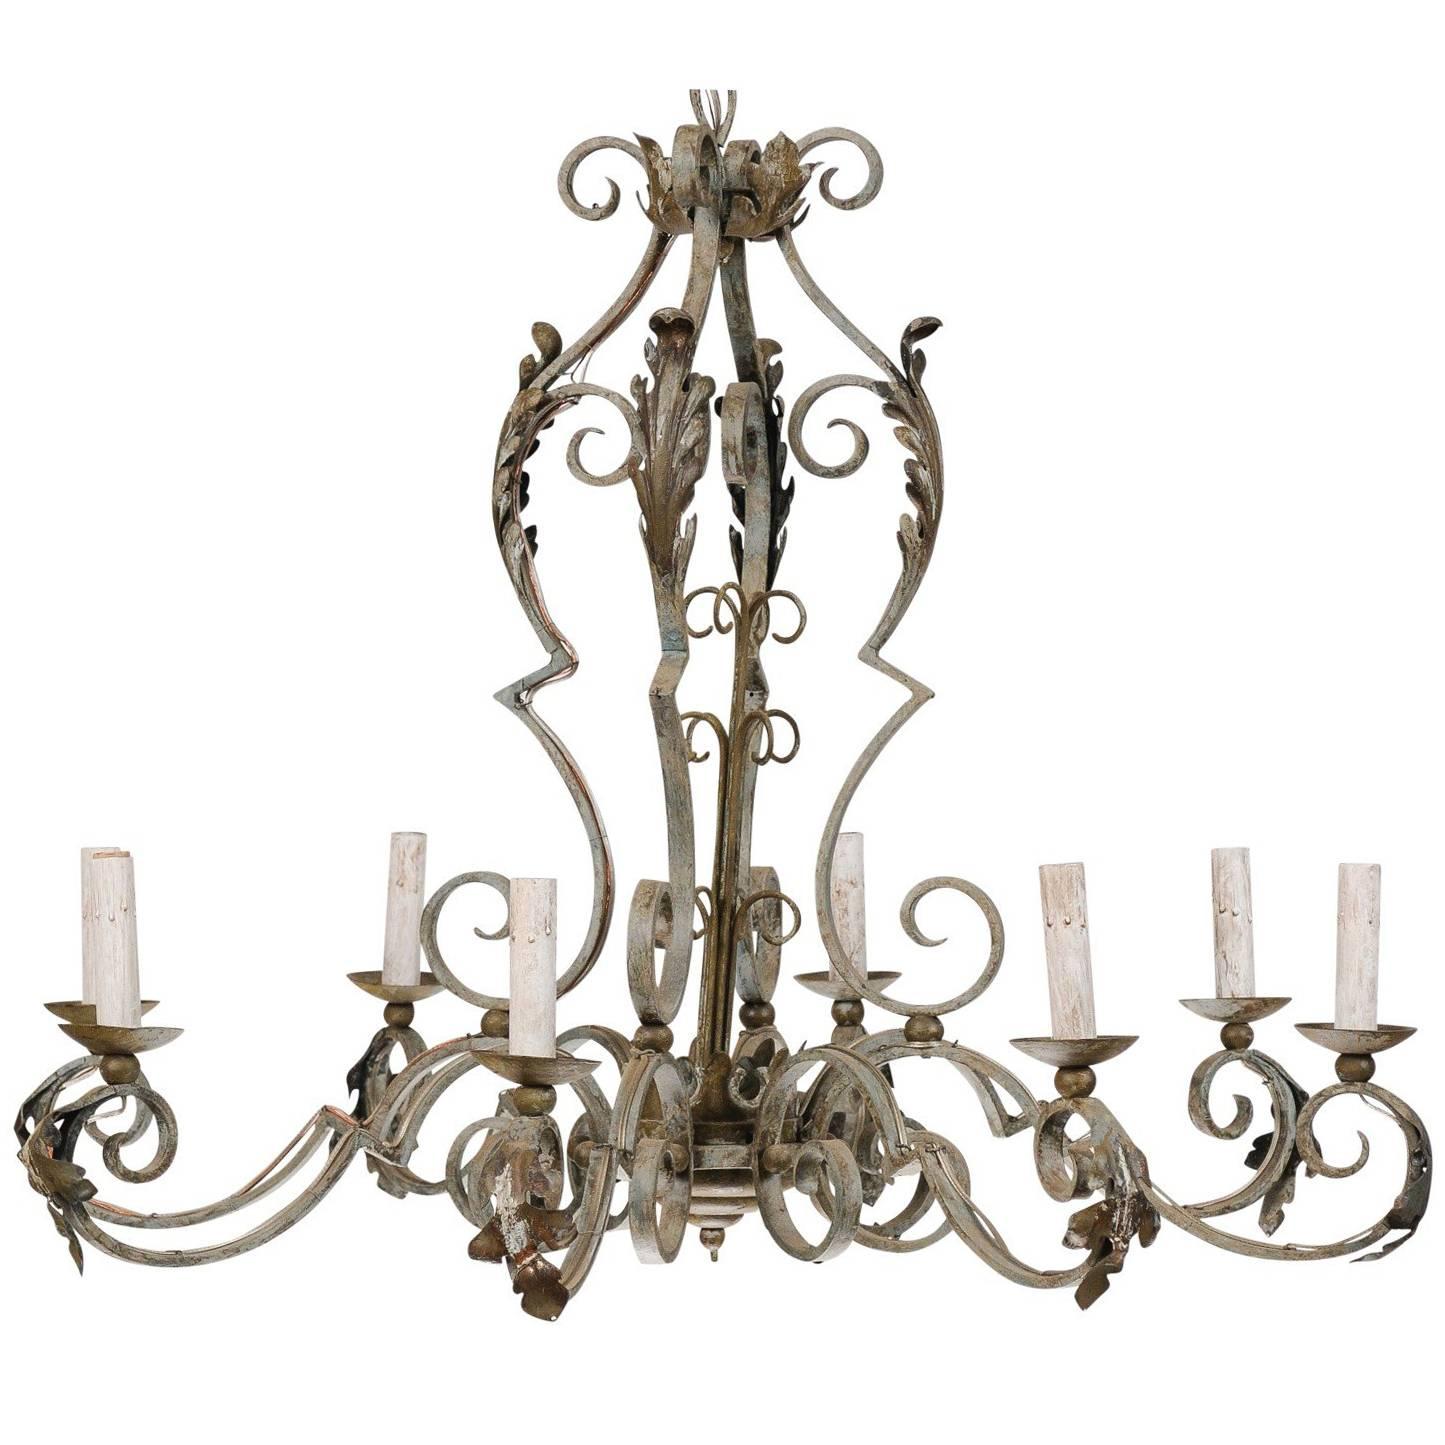 Ornate French Painted Iron Eight-Light Chandelier with Acanthus Leaves